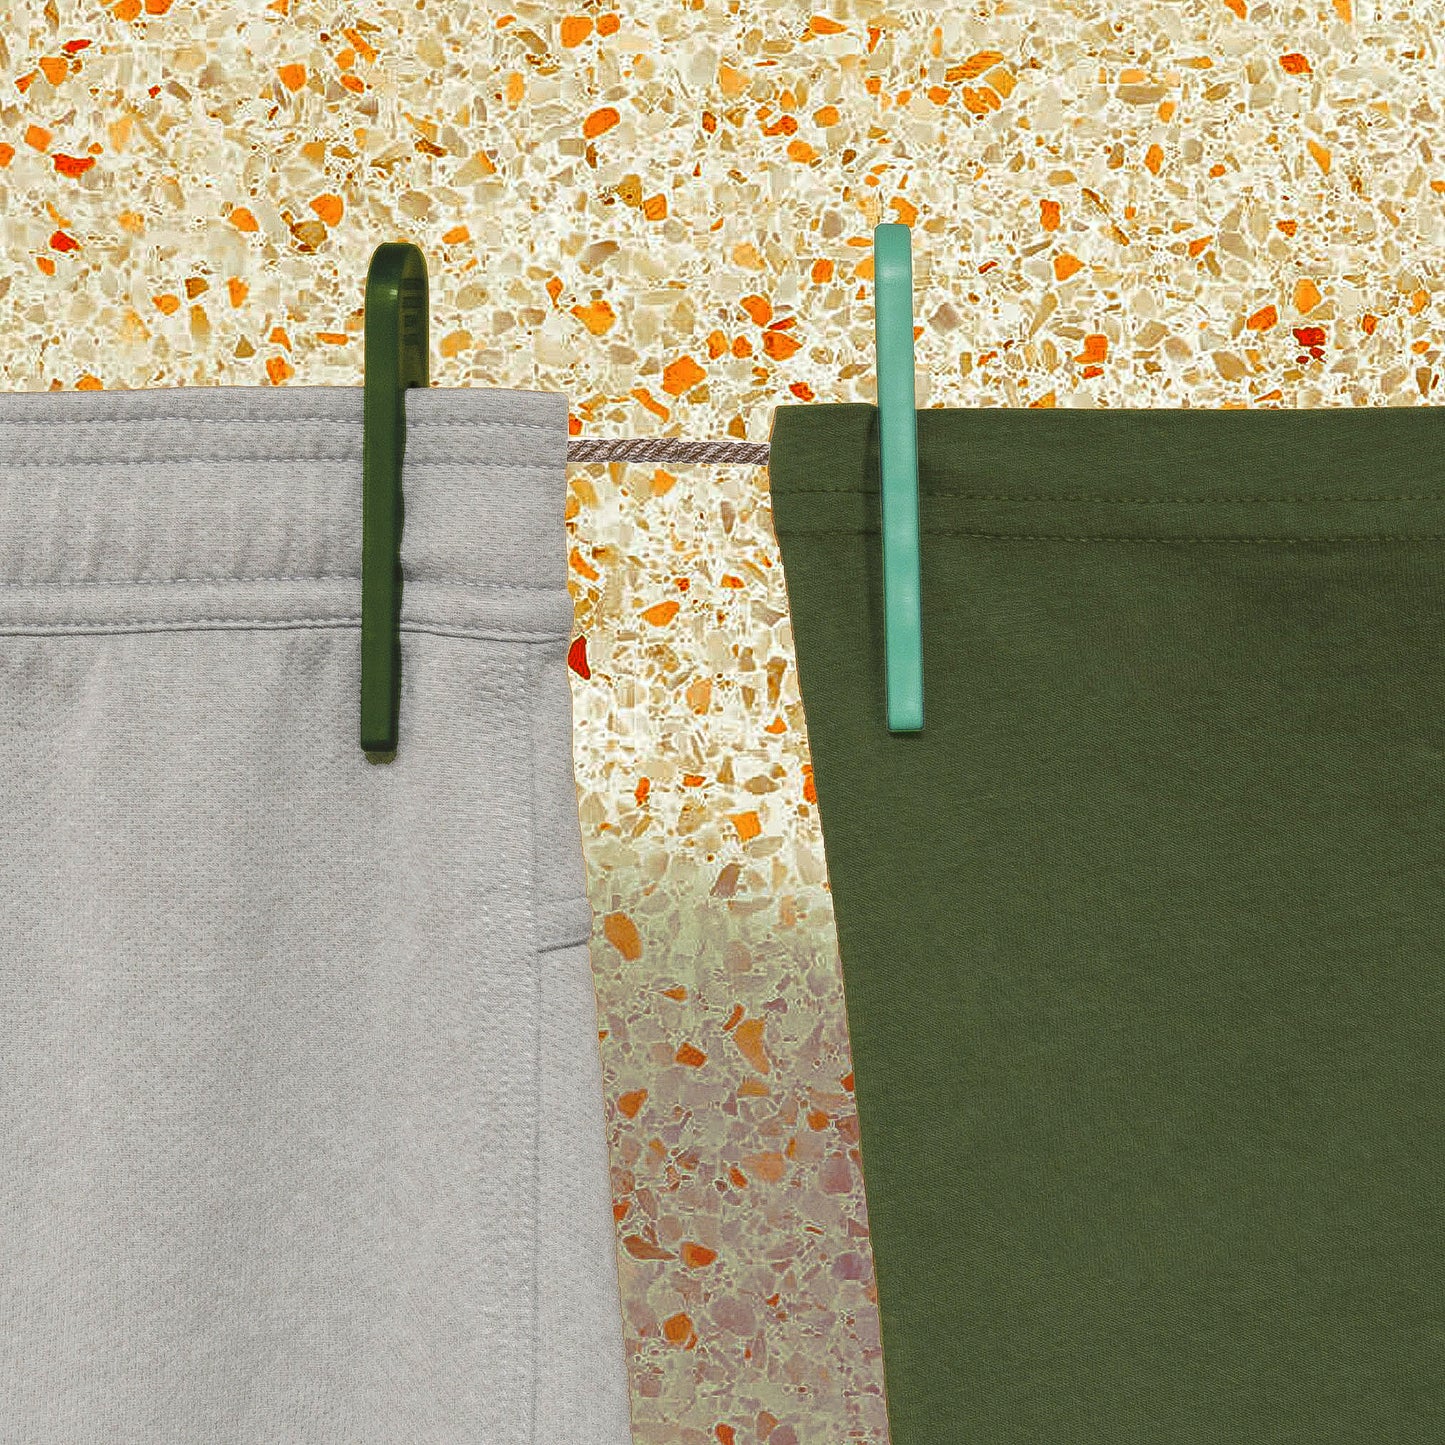 Grey shorts and a green t-shirt hang from a clothesline in front of a terrazzo wall; green ocean plastic clothespins hold them in place